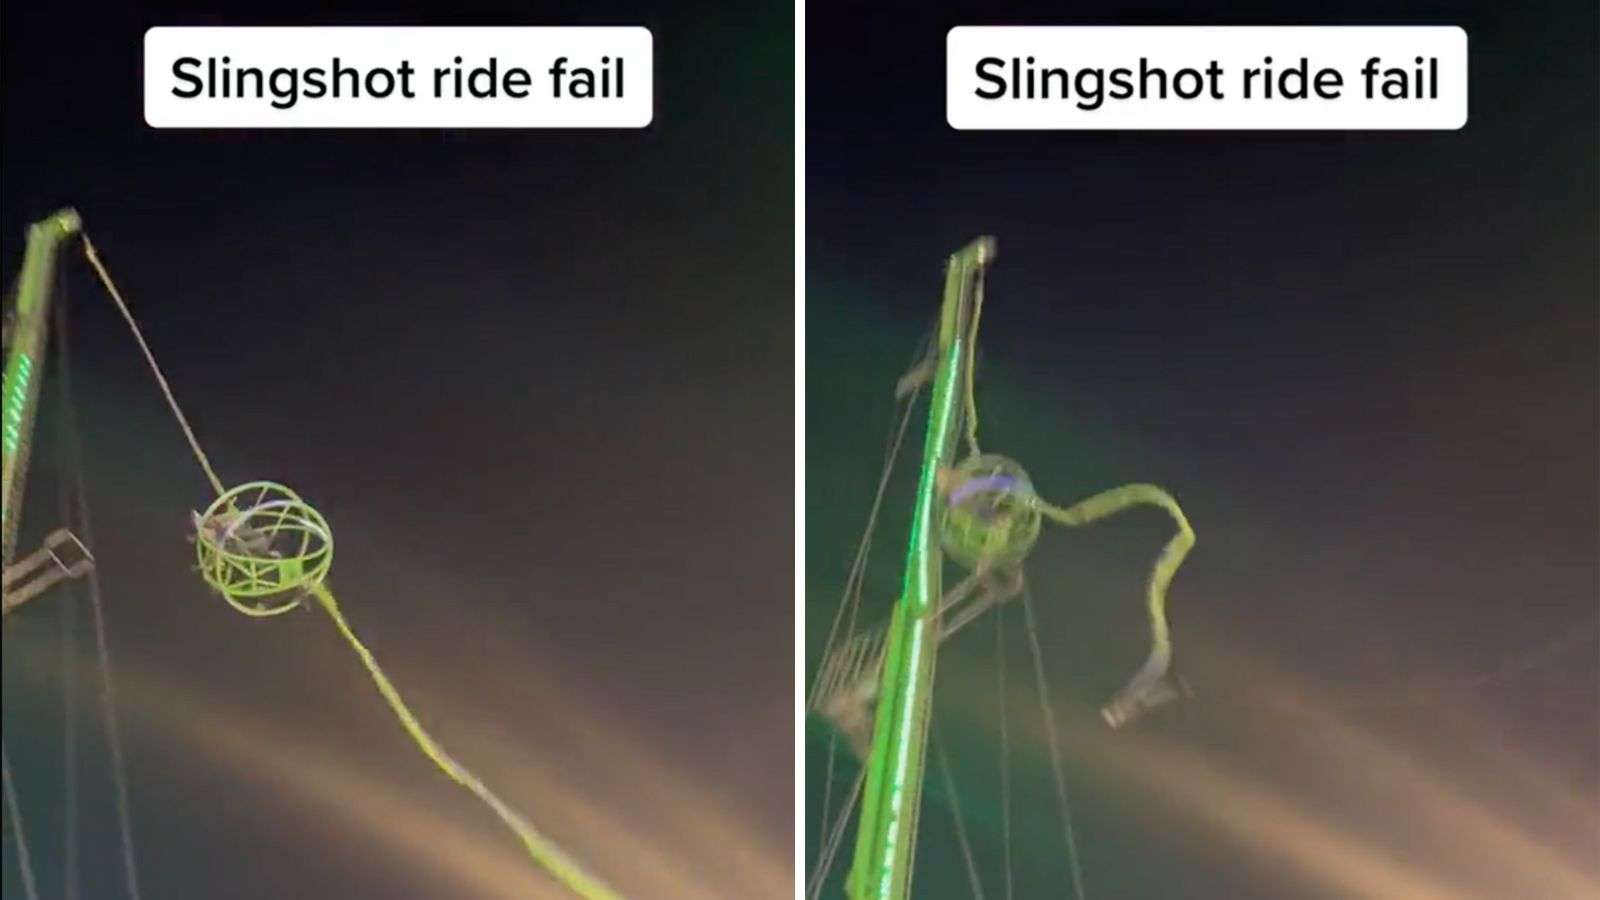 Viral video captures terrifying moment slingshot ride snaps and crashes